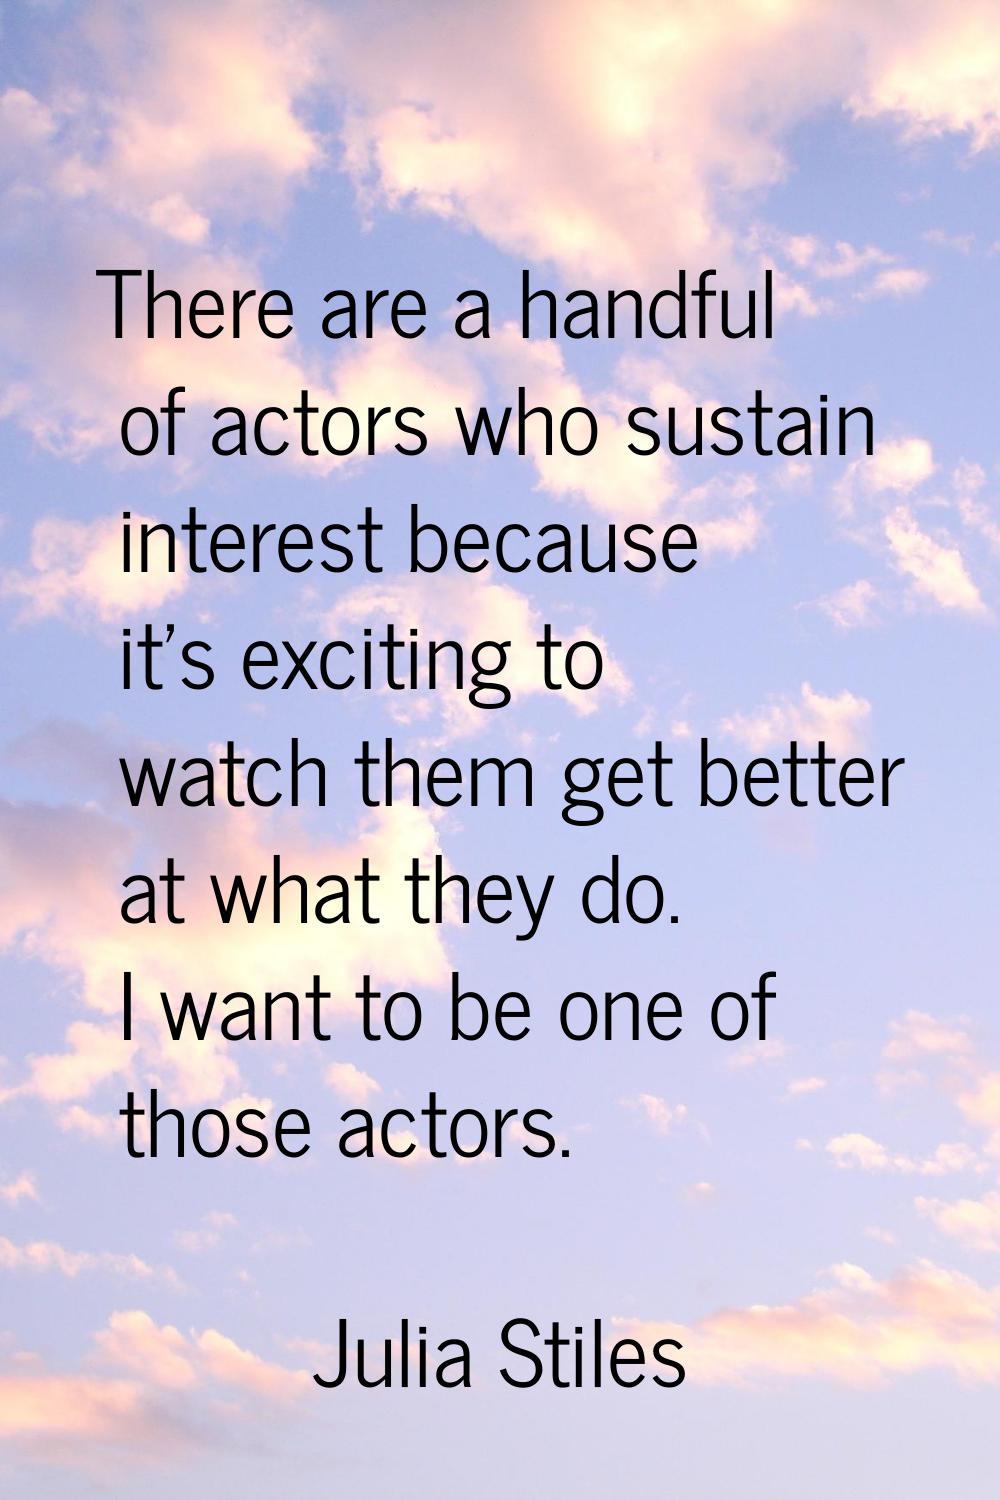 There are a handful of actors who sustain interest because it's exciting to watch them get better a